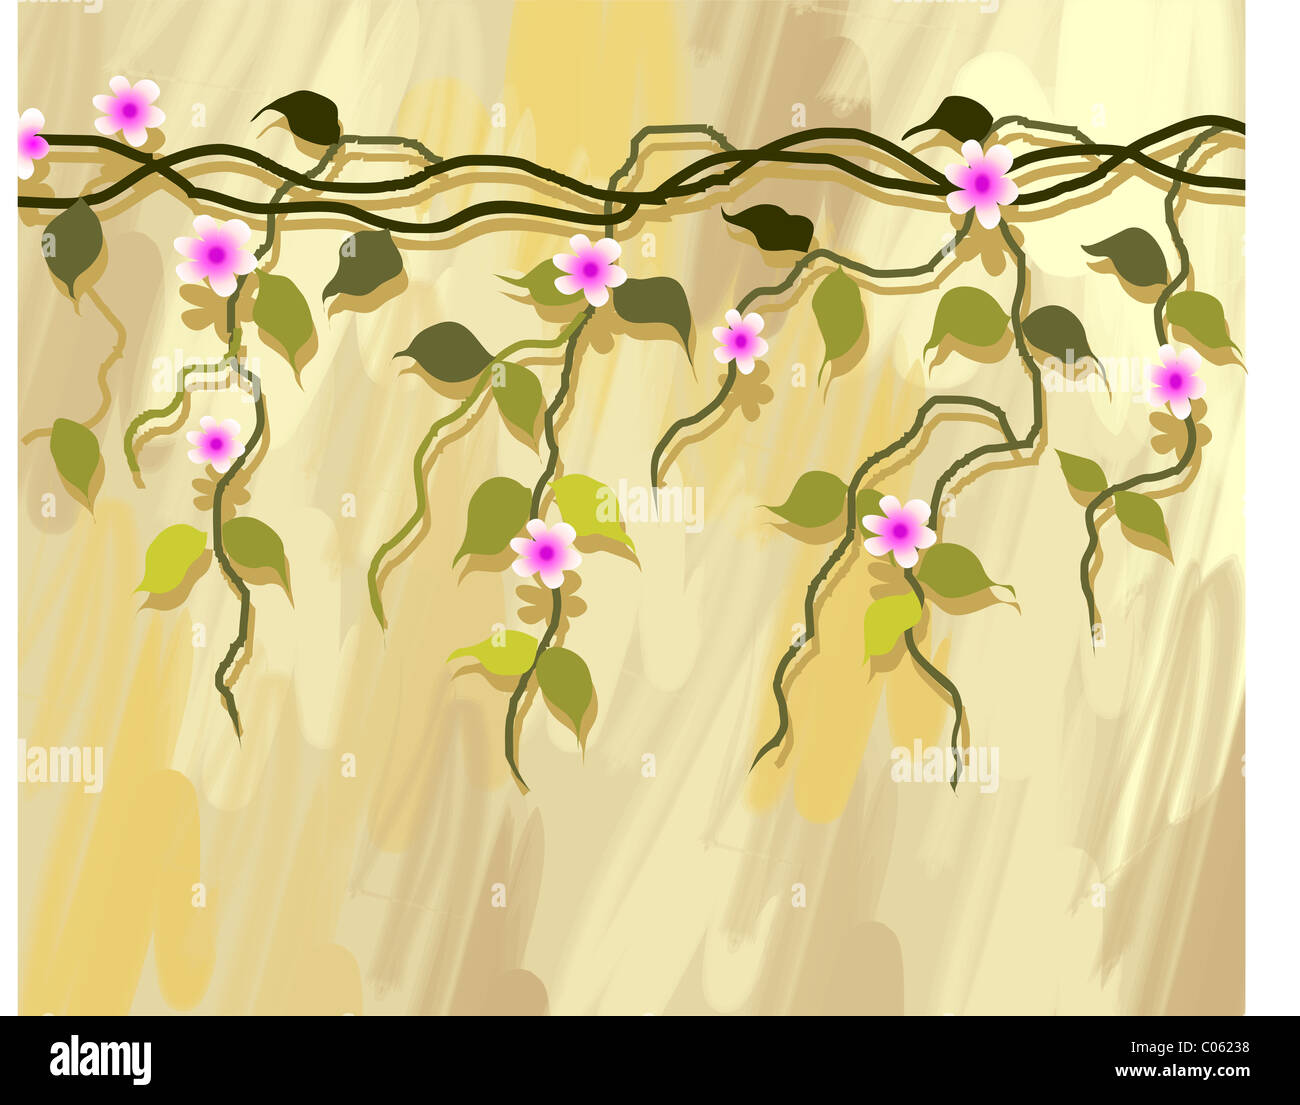 Digital painting of flower and leaves. The artist is experiencing the beauty and elegance of the flower along with the leaves. Stock Photo